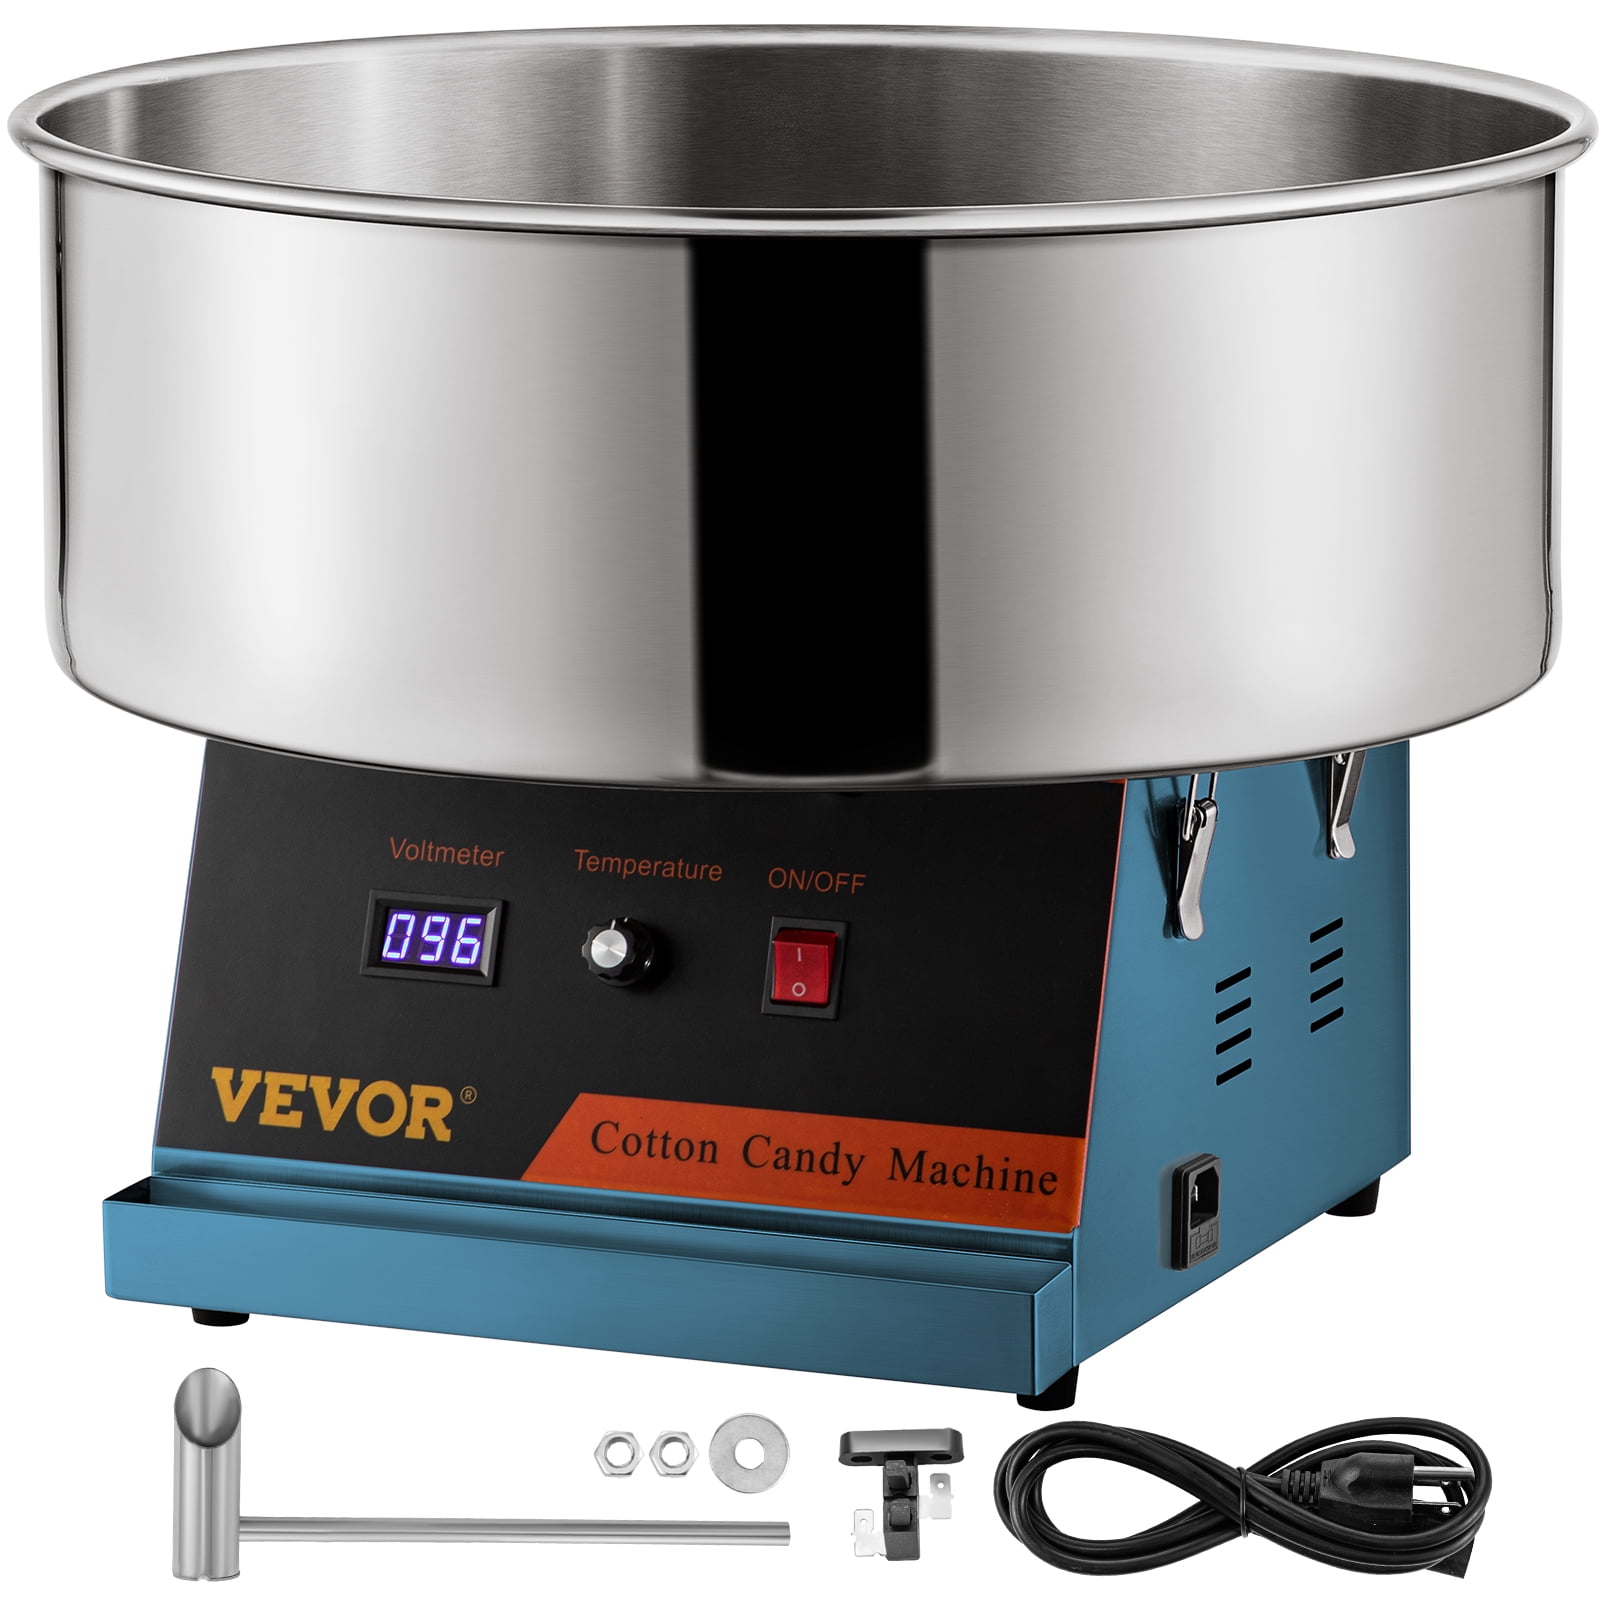 VEVOR Blue Commercial Cotton Candy Machine with Cart 220V Stainless Steel Electric Candy Floss Maker with Cart 19.7 Inch Stainless Steel Bowl Perfect for Various Parties 